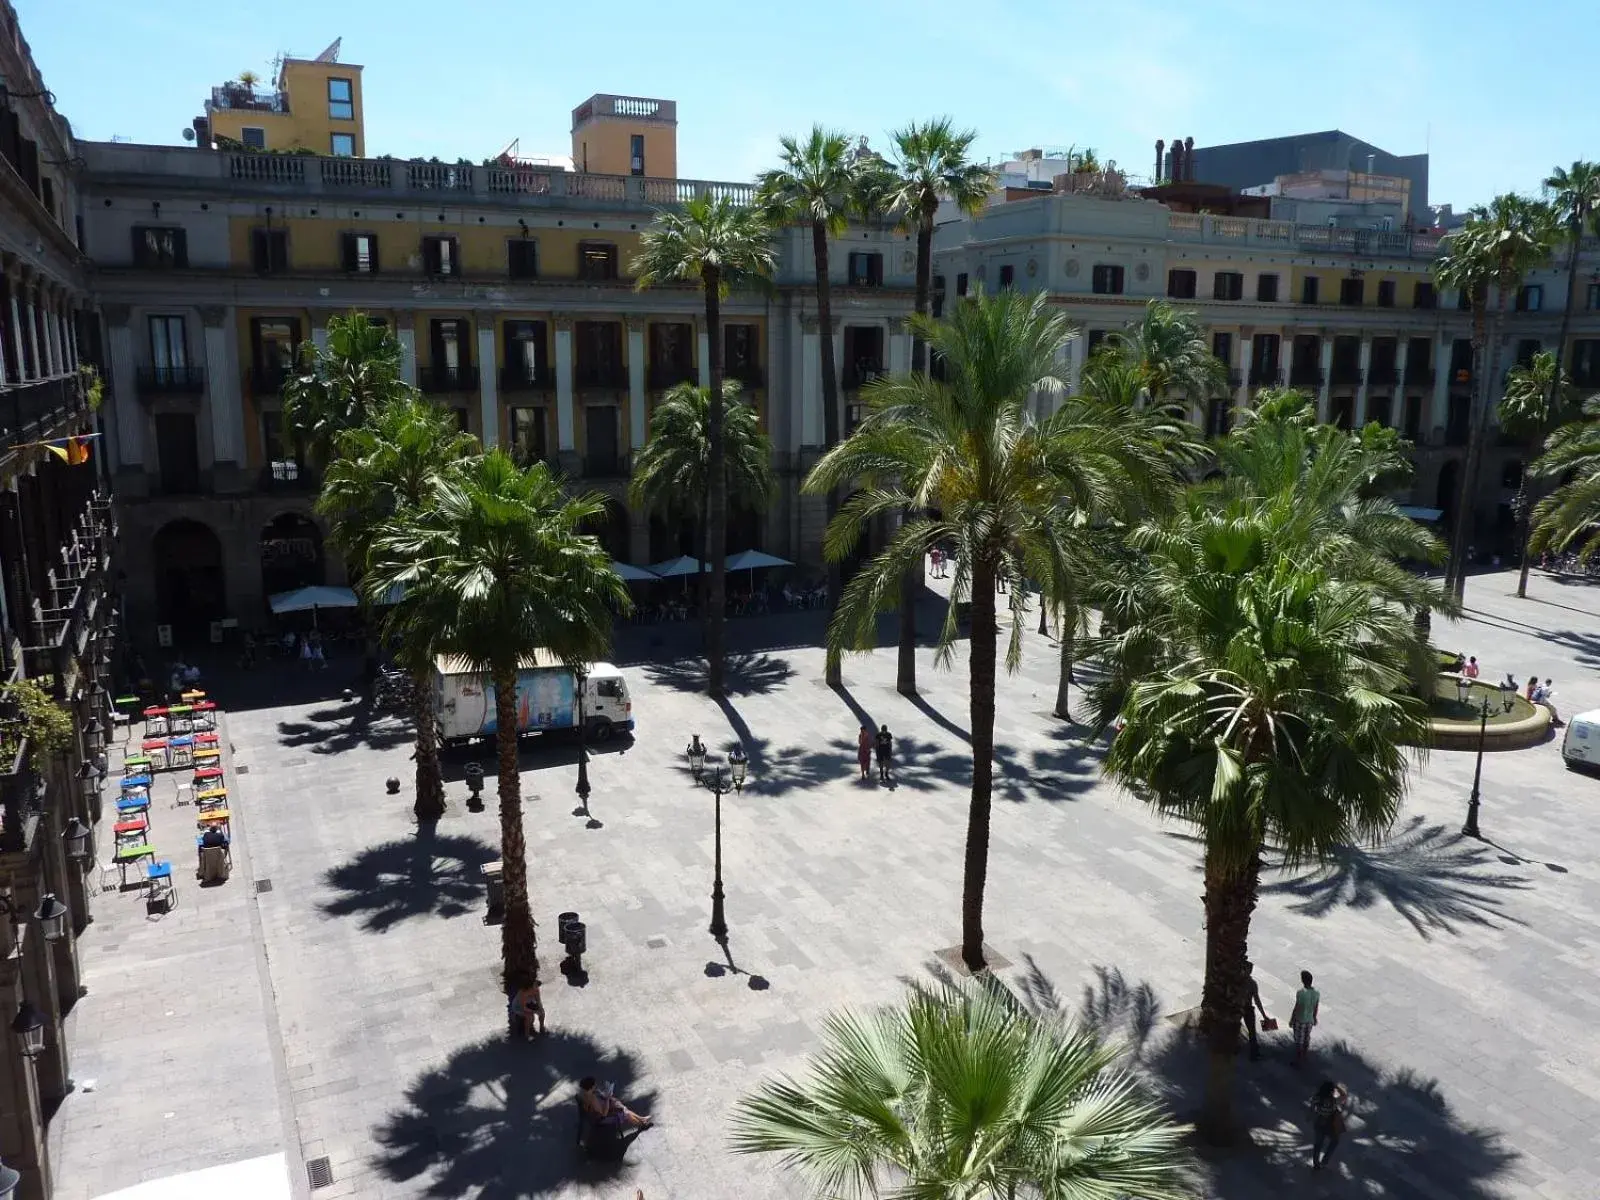 Area and facilities in Roma Reial